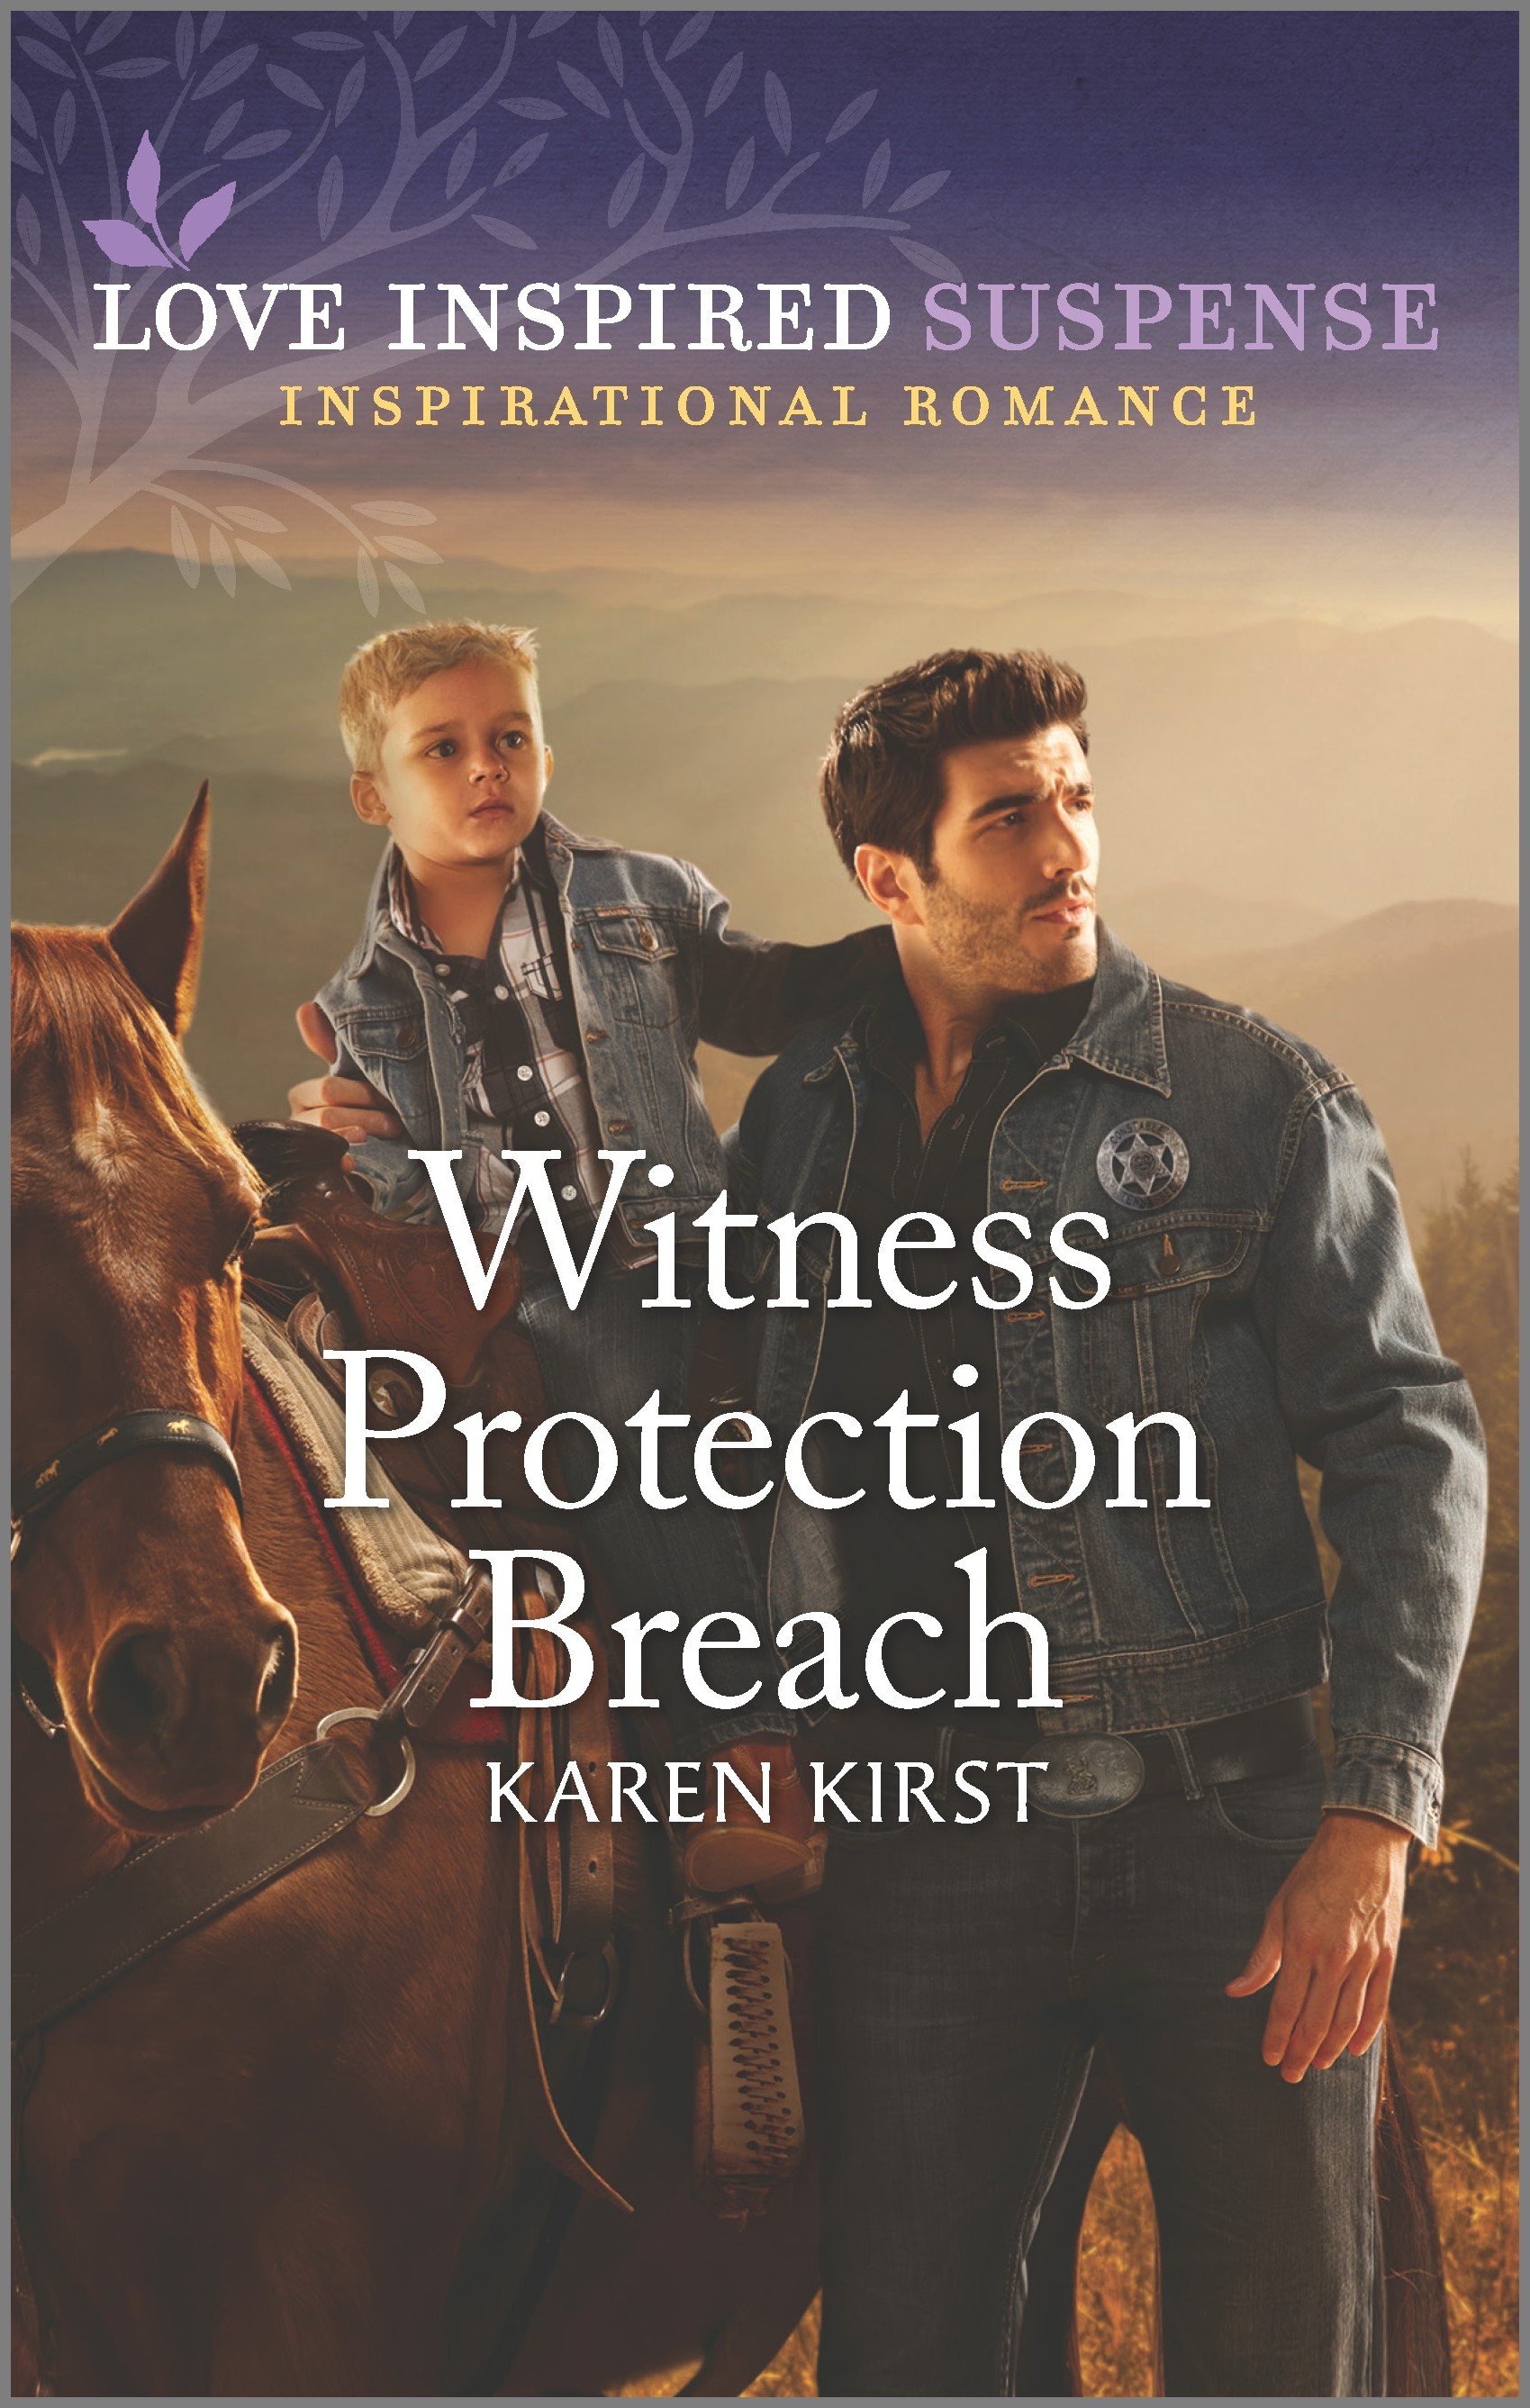 WITNESS PROTECTION BREACH by Karen Kirst